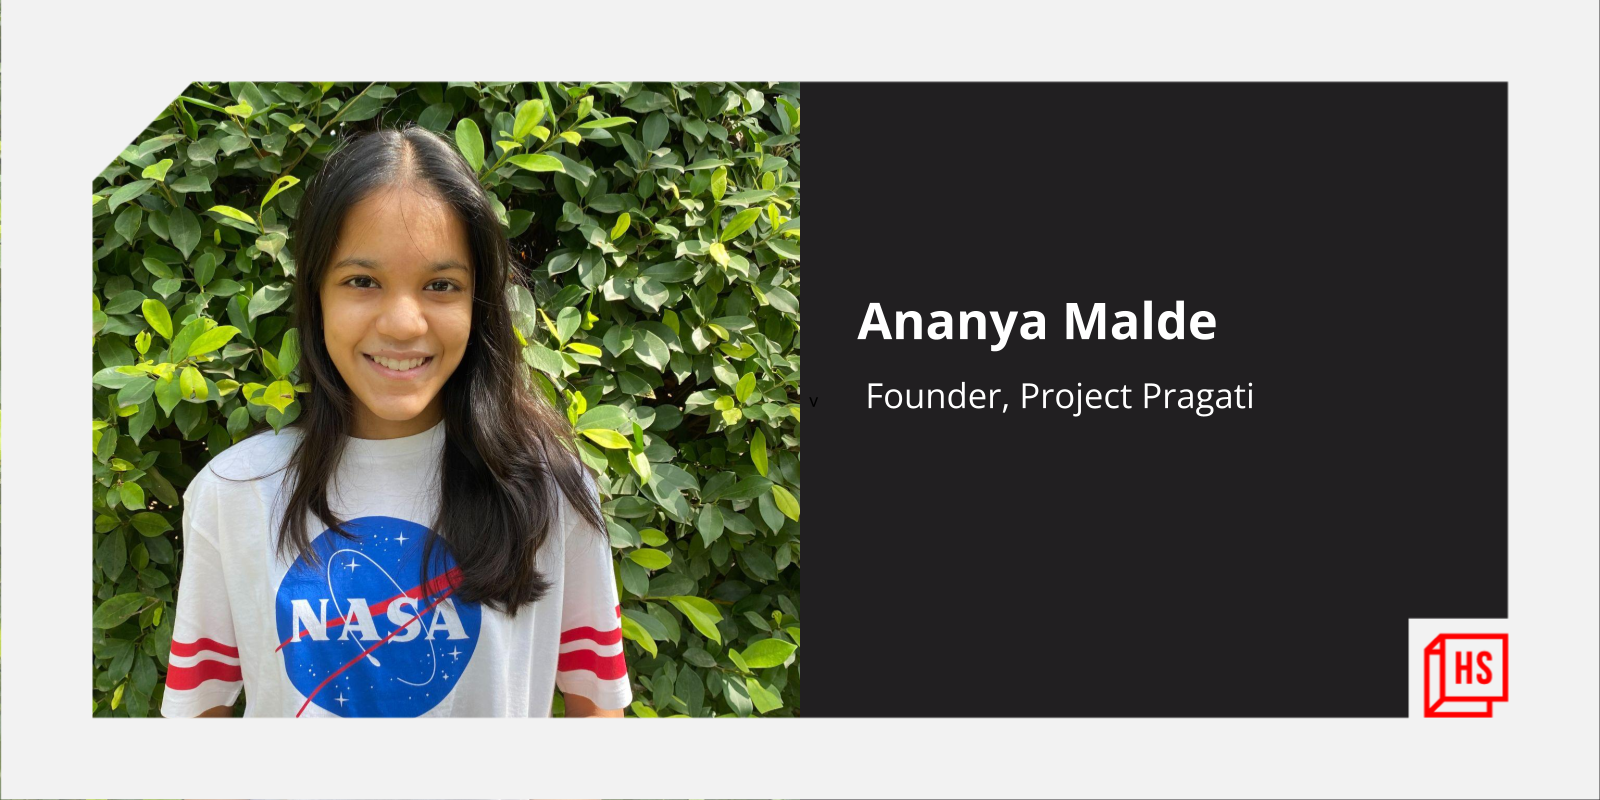 What led this 14-year-old to work for period awareness through Project Pragati in rural India 
